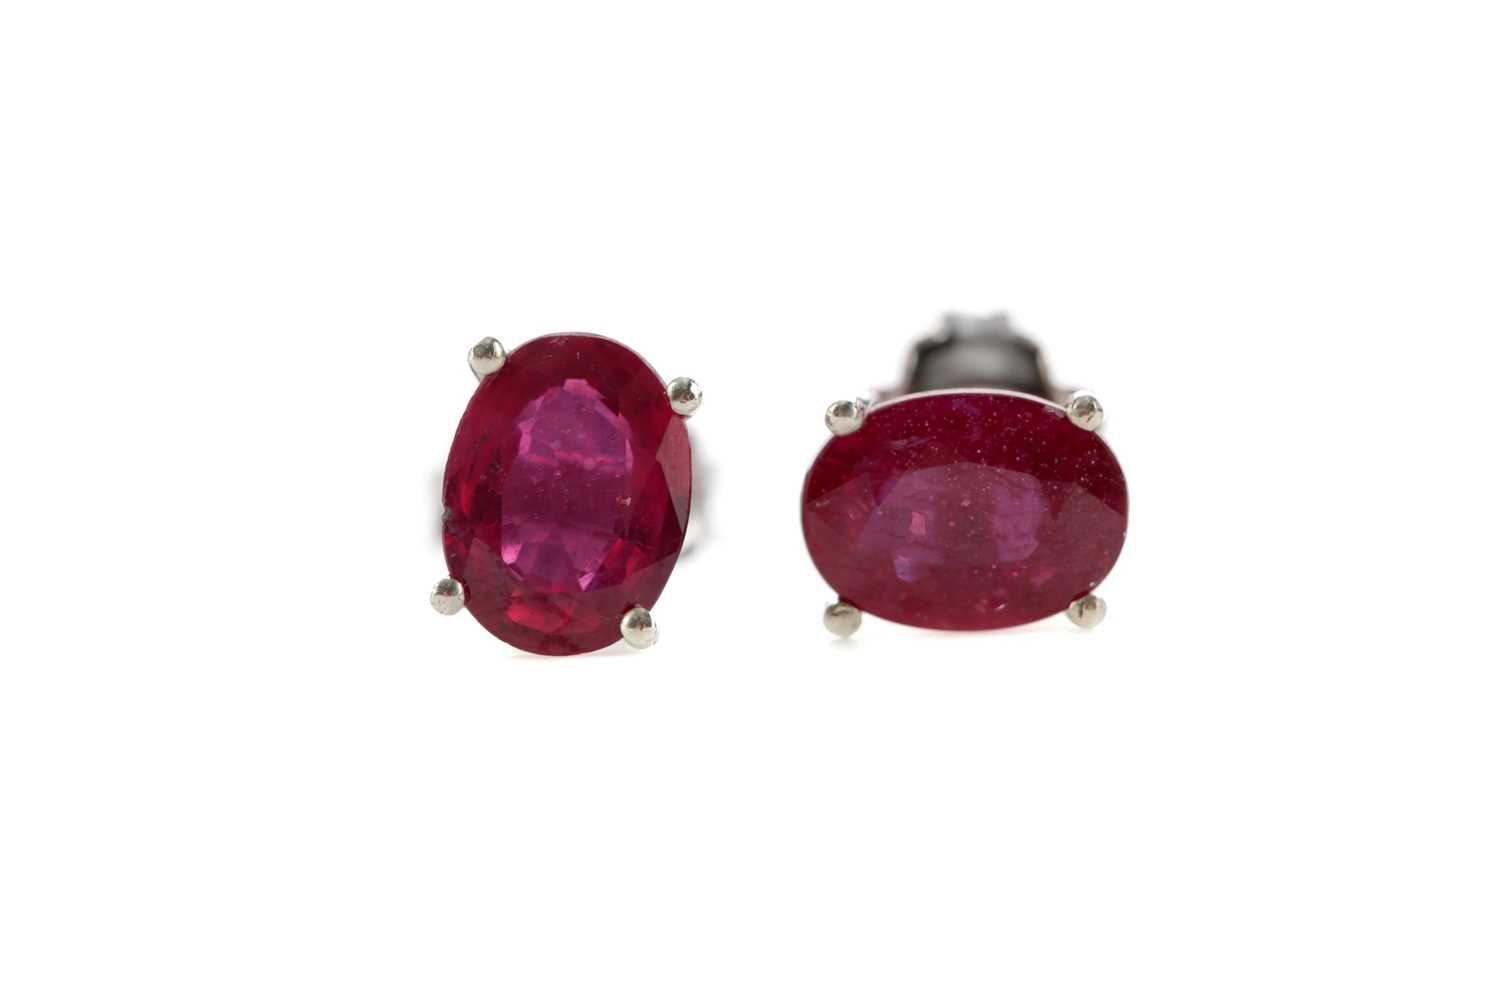 Lot 1342 - A PAIR OF TREATED RUBY STUD EARRINGS